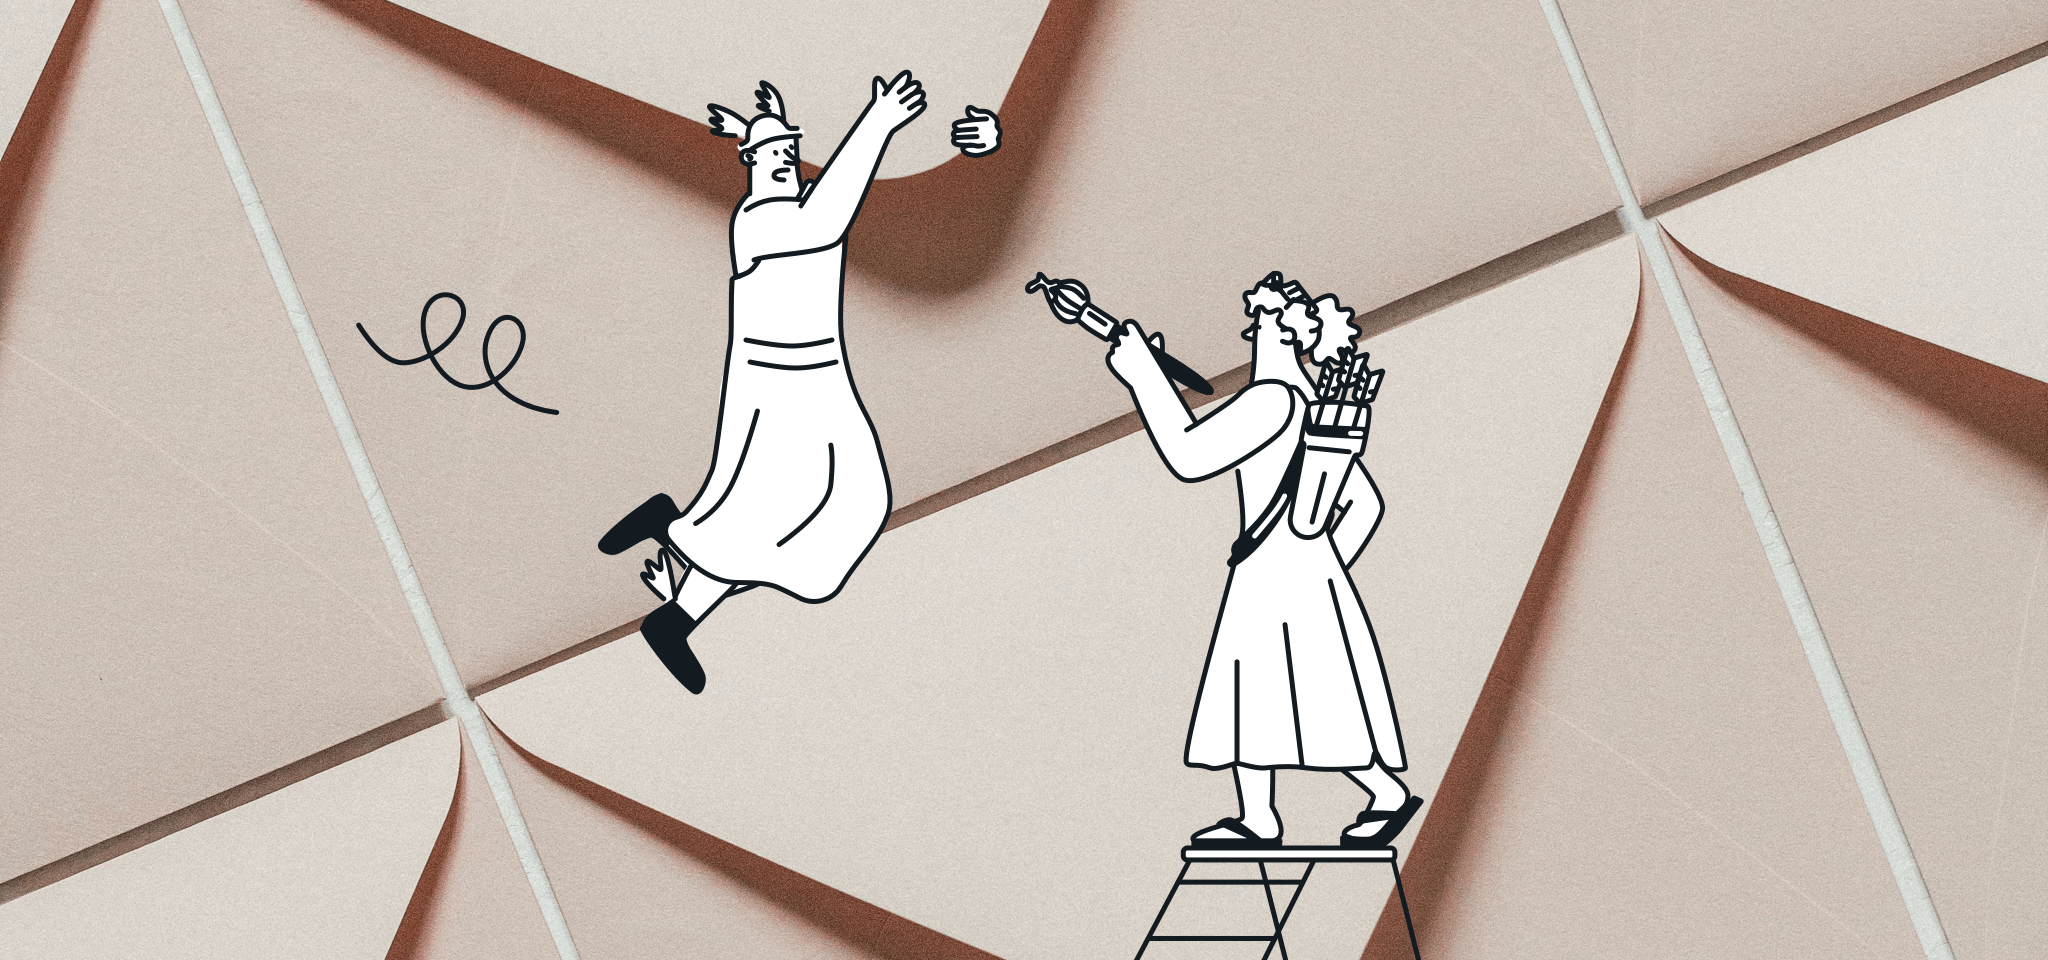 Hermes is about to fall from an envelope in front of a Goddess standing on some stairs